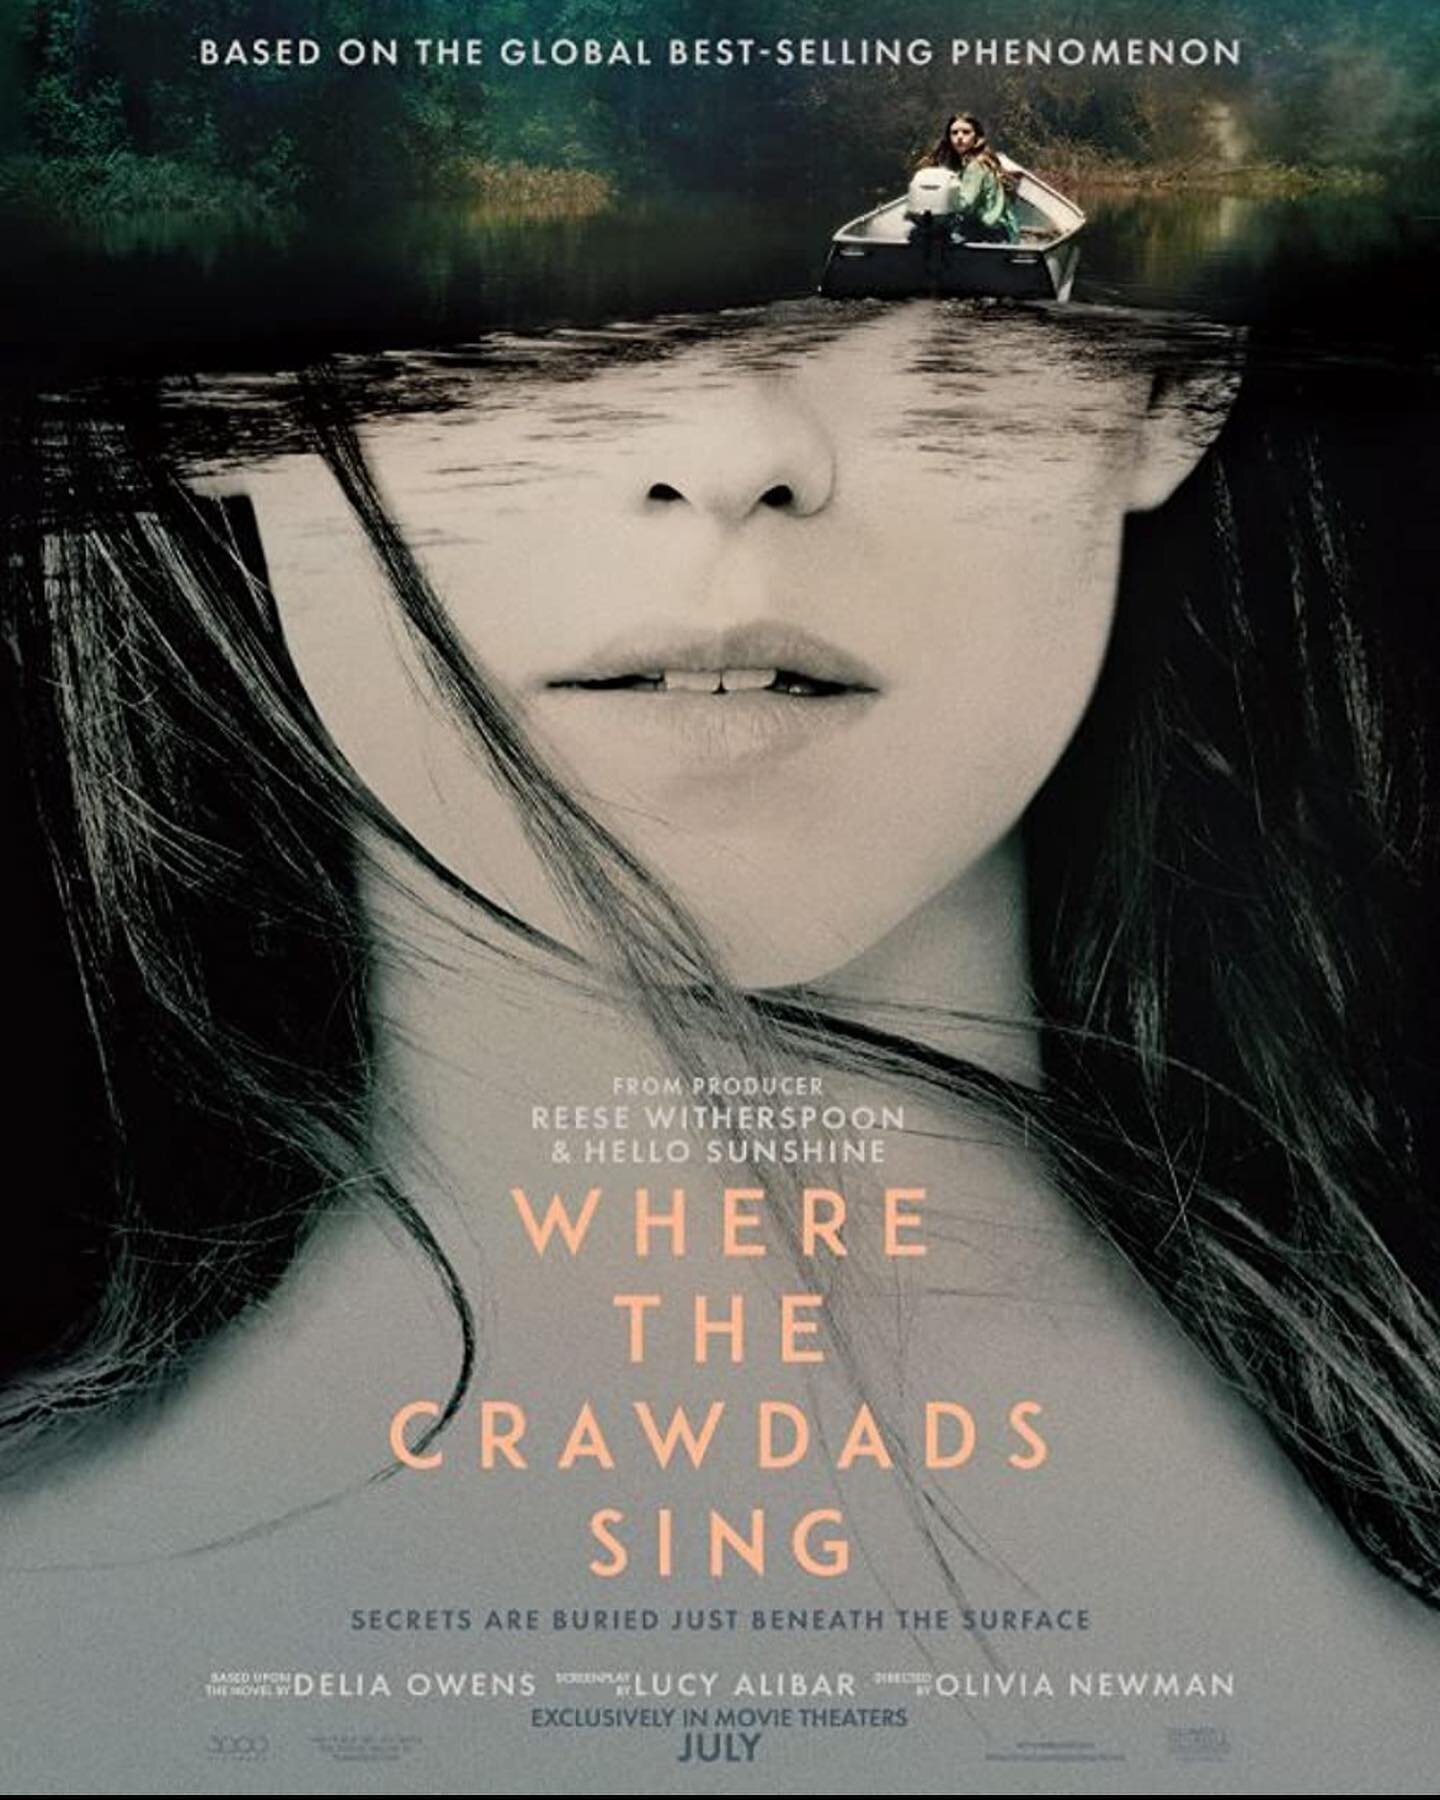 As always.. It was such a privilege to get to be part of Mychael&rsquo;s team, witnessing his magic on the film, &ldquo;Where the Crawdads Sing&rdquo;

There is so much to learn.. learning is endless!!😮&zwj;💨

Also got to meet incredible musicians 